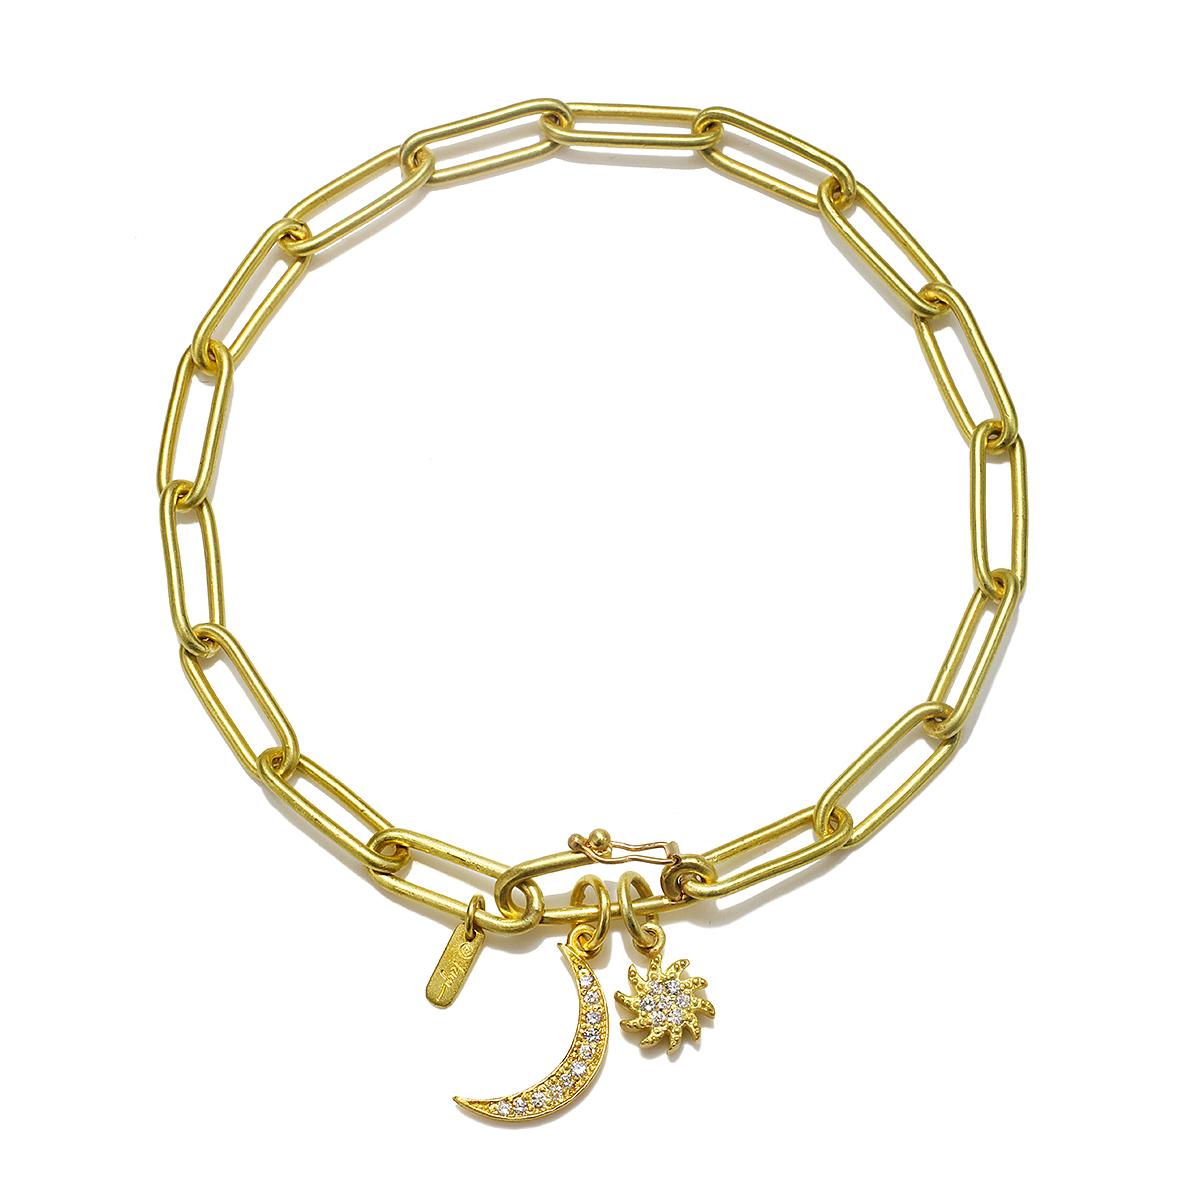 Chic, versatile and so wearable!
Faye Kim's solid 18k gold* handmade paper clip link chain bracelet can be worn alone, layered with others, or dressed up with charms.  
Sleek and elegant with just the right amount of heft to elevate your everyday